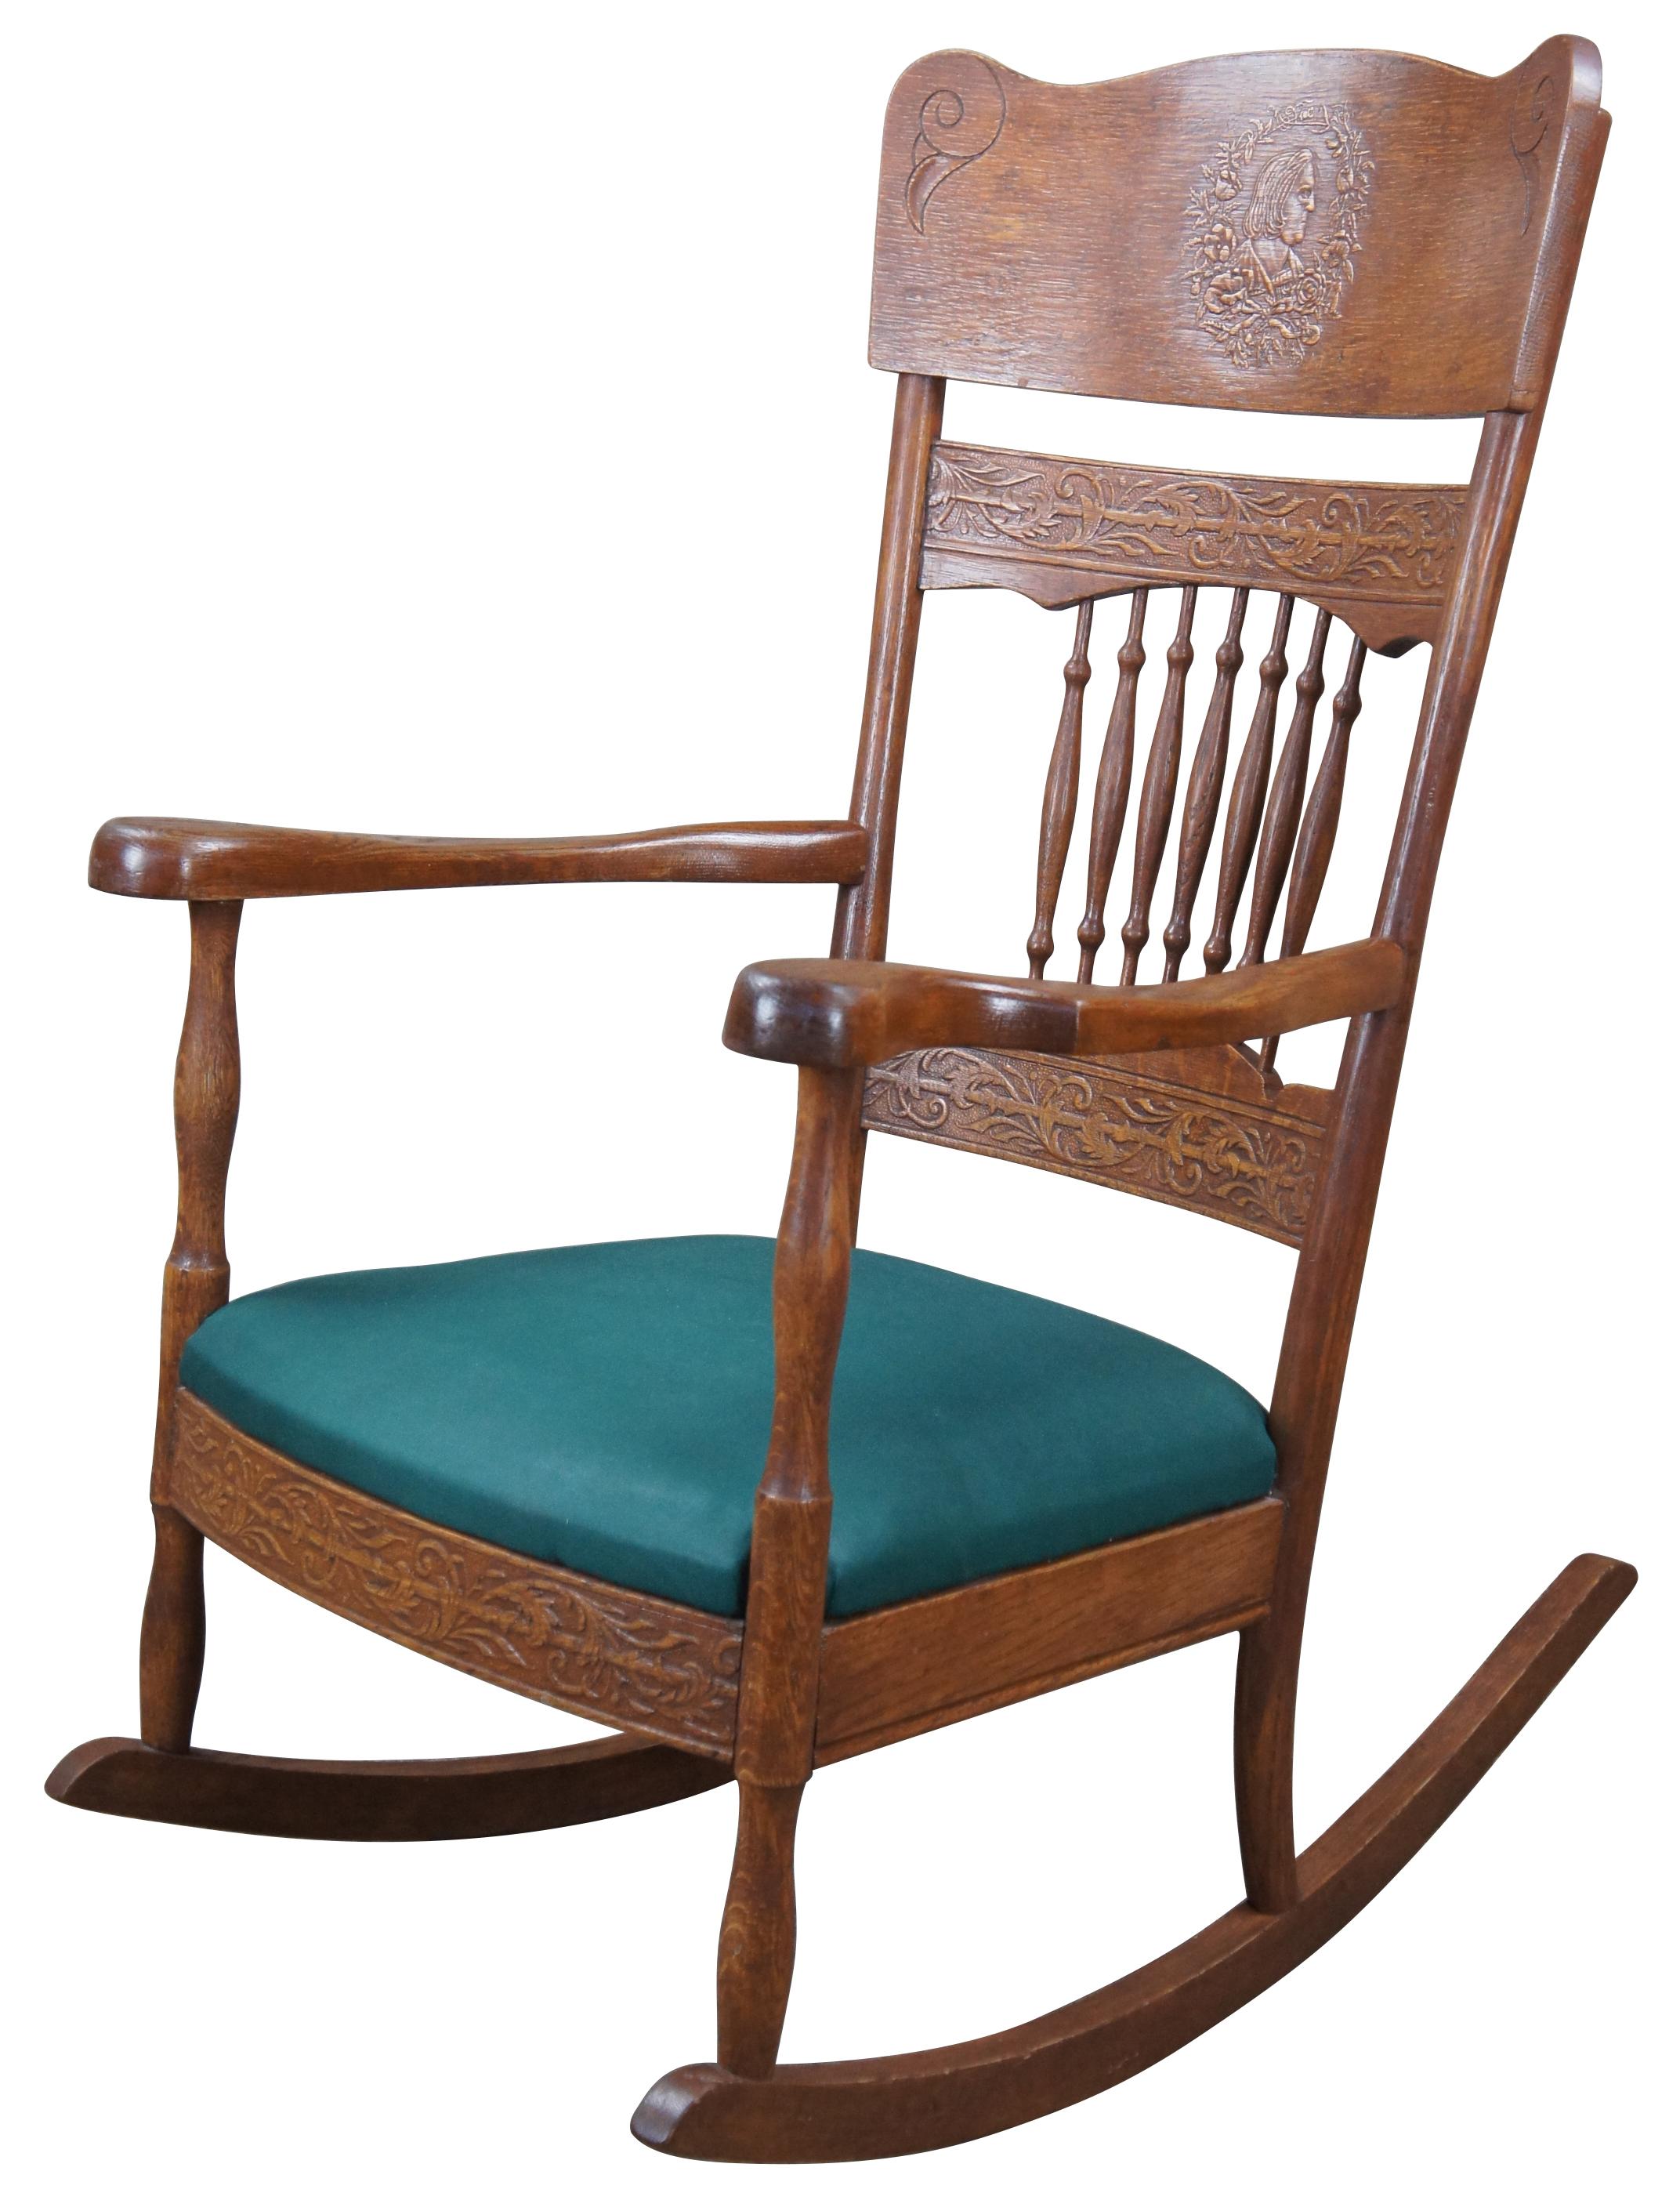 Antique late Victorian pressback rocking chair.  A beautiful design featuring a serpentine crest rail with a laurel wreath wrapped cameo at the center featuring a distinguished gentleman.  The cameo is flanked by decorative engravings along the